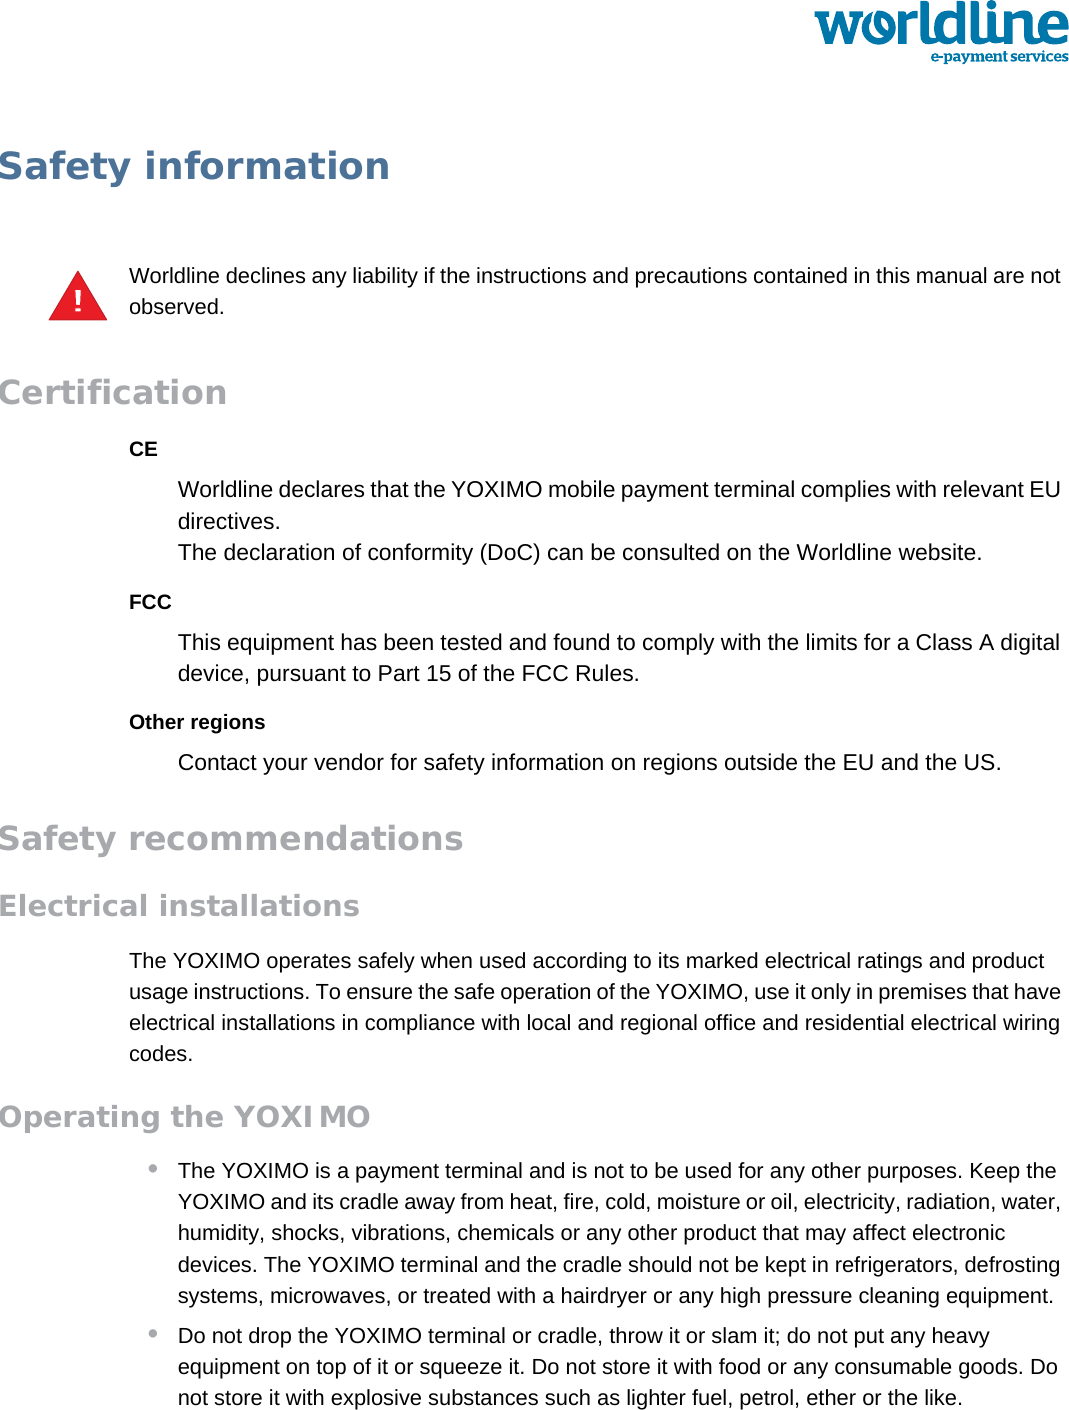 public 37om_yxm_safety.fm document release 1.1 last updated 30/9/15Safety informationWorldline declines any liability if the instructions and precautions contained in this manual are not observed.CertificationCEWorldline declares that the YOXIMO mobile payment terminal complies with relevant EU directives.The declaration of conformity (DoC) can be consulted on the Worldline website.FCCThis equipment has been tested and found to comply with the limits for a Class A digital device, pursuant to Part 15 of the FCC Rules.Other regionsContact your vendor for safety information on regions outside the EU and the US.Safety recommendationsElectrical installationsThe YOXIMO operates safely when used according to its marked electrical ratings and product usage instructions. To ensure the safe operation of the YOXIMO, use it only in premises that have electrical installations in compliance with local and regional office and residential electrical wiring codes.Operating the YOXIMO•The YOXIMO is a payment terminal and is not to be used for any other purposes. Keep the YOXIMO and its cradle away from heat, fire, cold, moisture or oil, electricity, radiation, water, humidity, shocks, vibrations, chemicals or any other product that may affect electronic devices. The YOXIMO terminal and the cradle should not be kept in refrigerators, defrosting systems, microwaves, or treated with a hairdryer or any high pressure cleaning equipment.•Do not drop the YOXIMO terminal or cradle, throw it or slam it; do not put any heavy equipment on top of it or squeeze it. Do not store it with food or any consumable goods. Do not store it with explosive substances such as lighter fuel, petrol, ether or the like.!